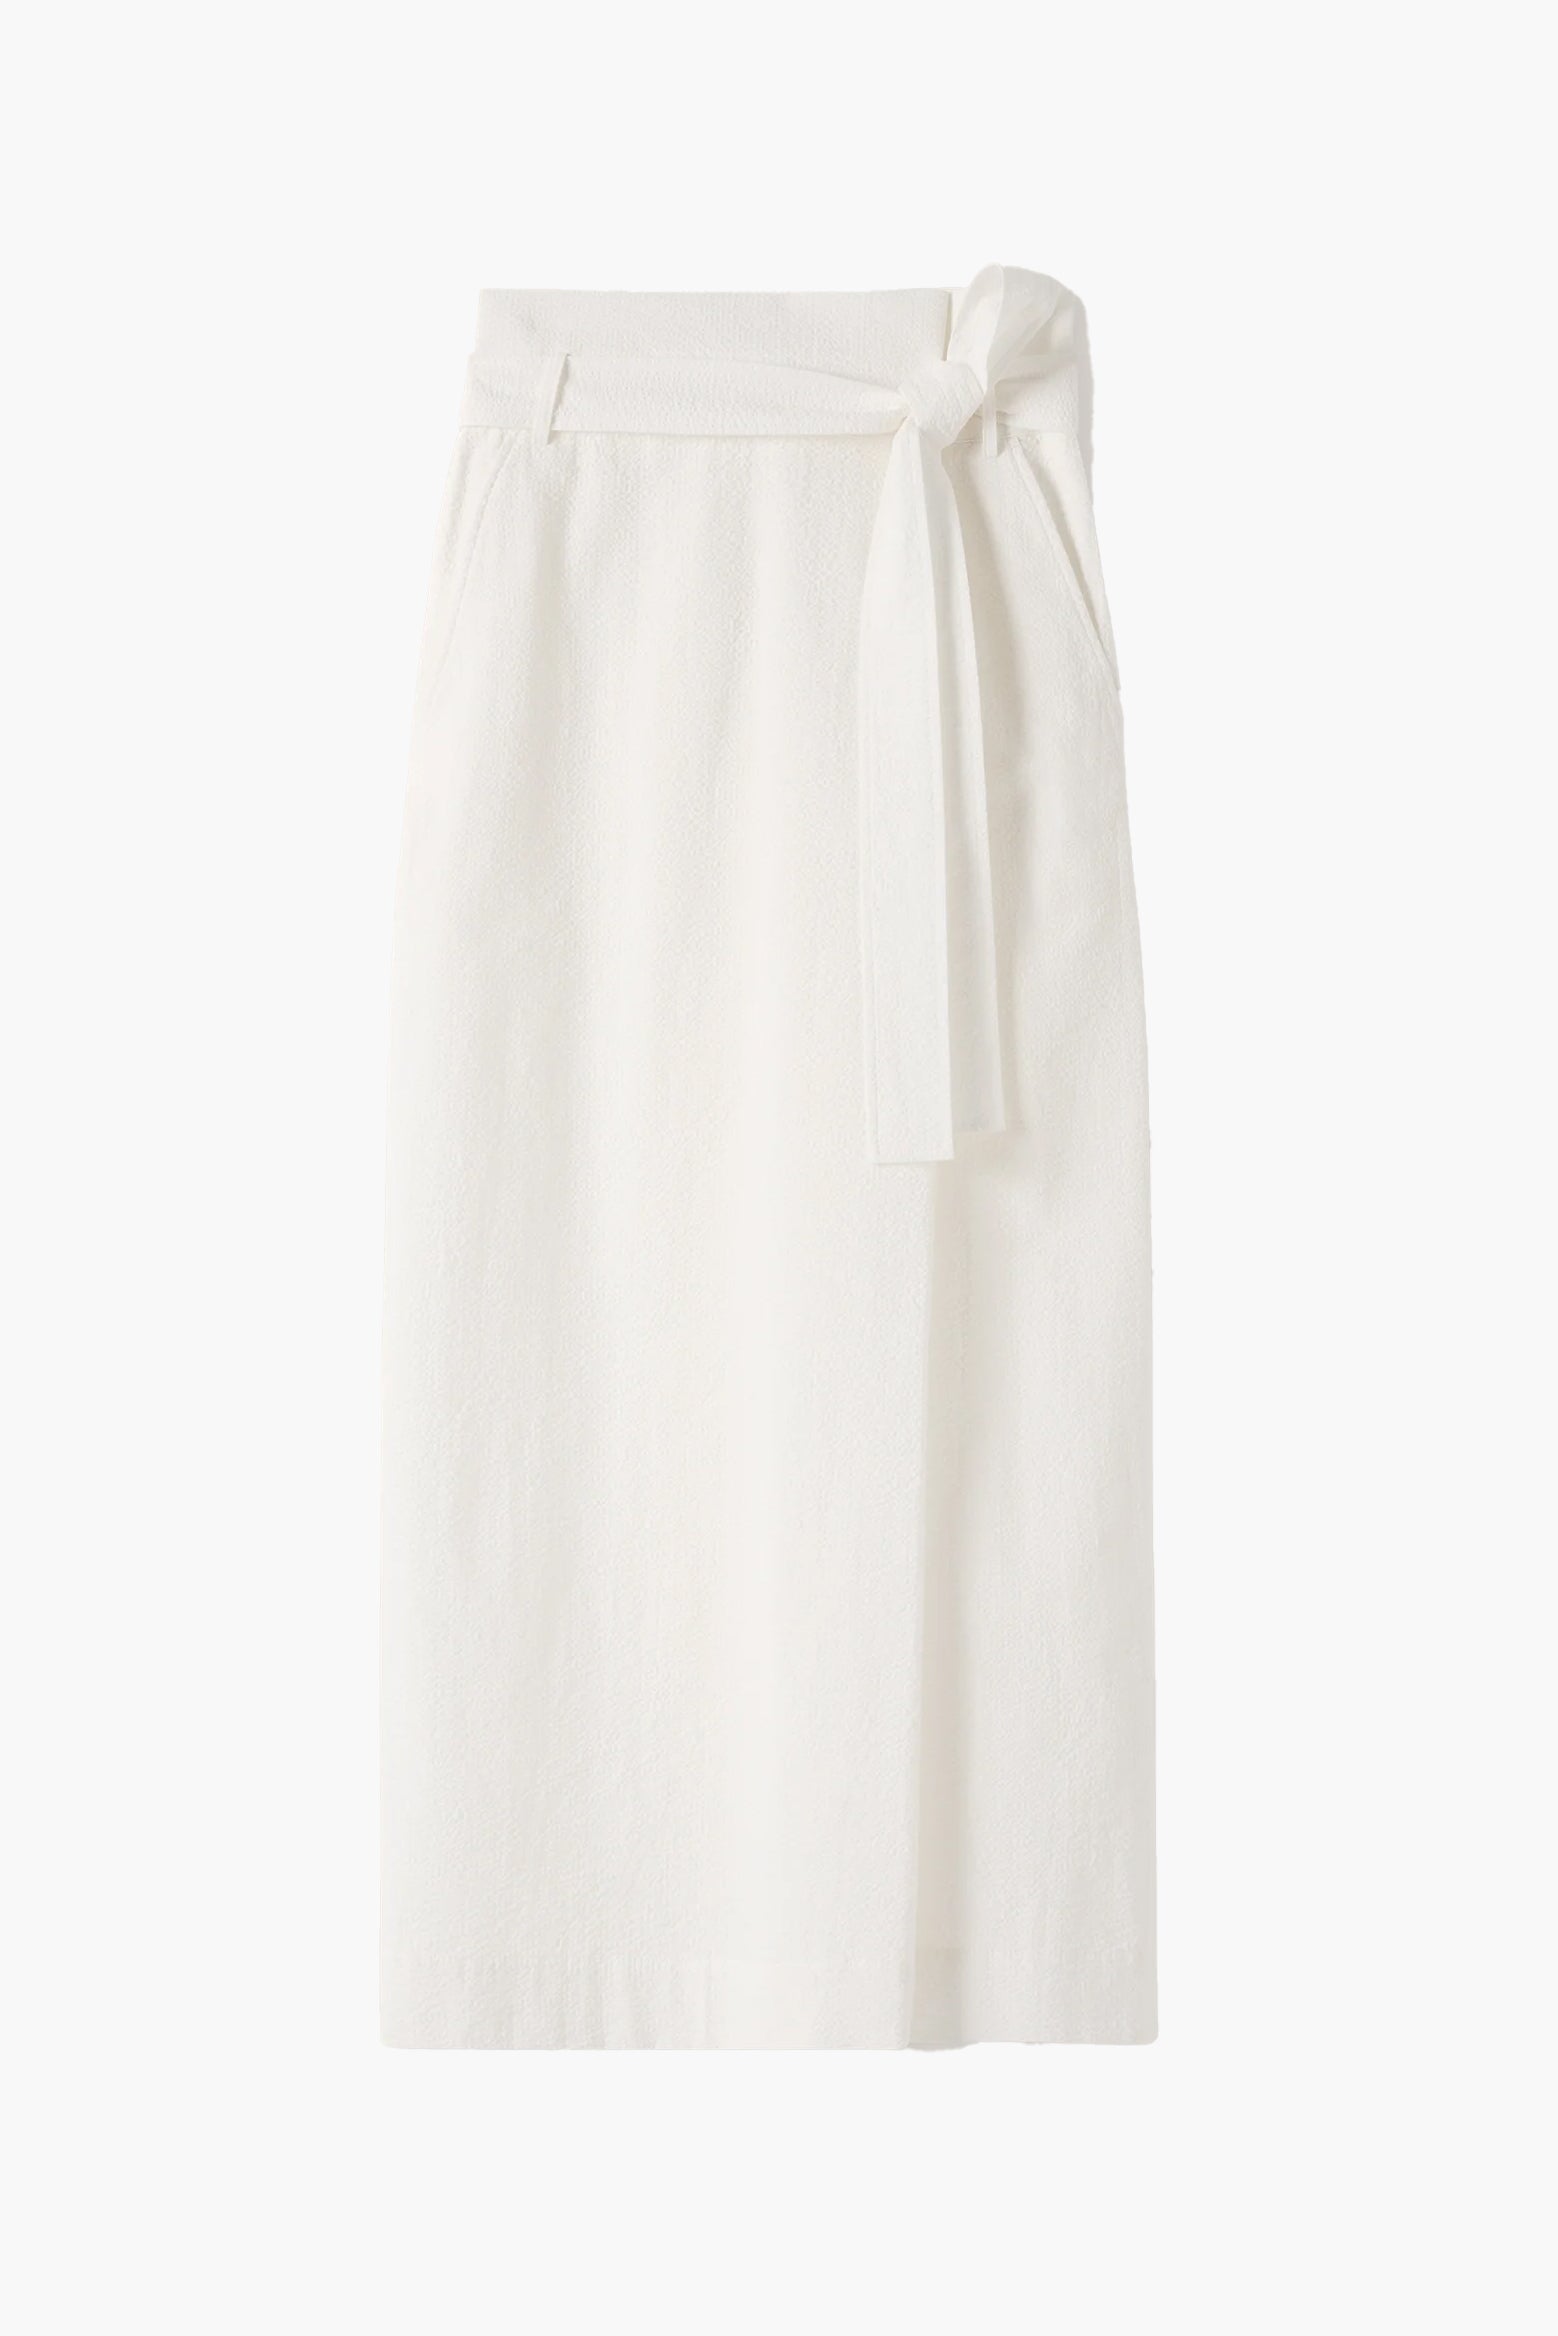 A.Emery Ven Skirt in Parchment available at The New Trend Australia.